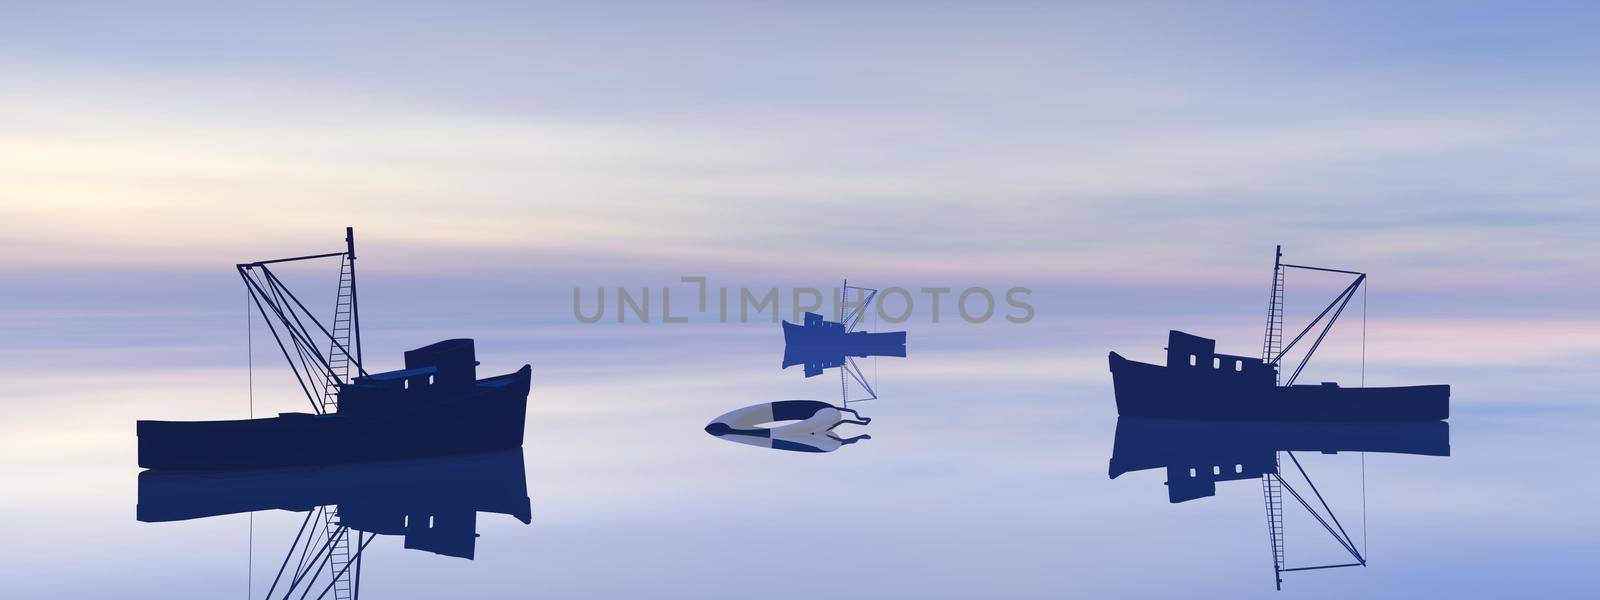 view on fishing boats with a very nice view - 3d rendering by mariephotos